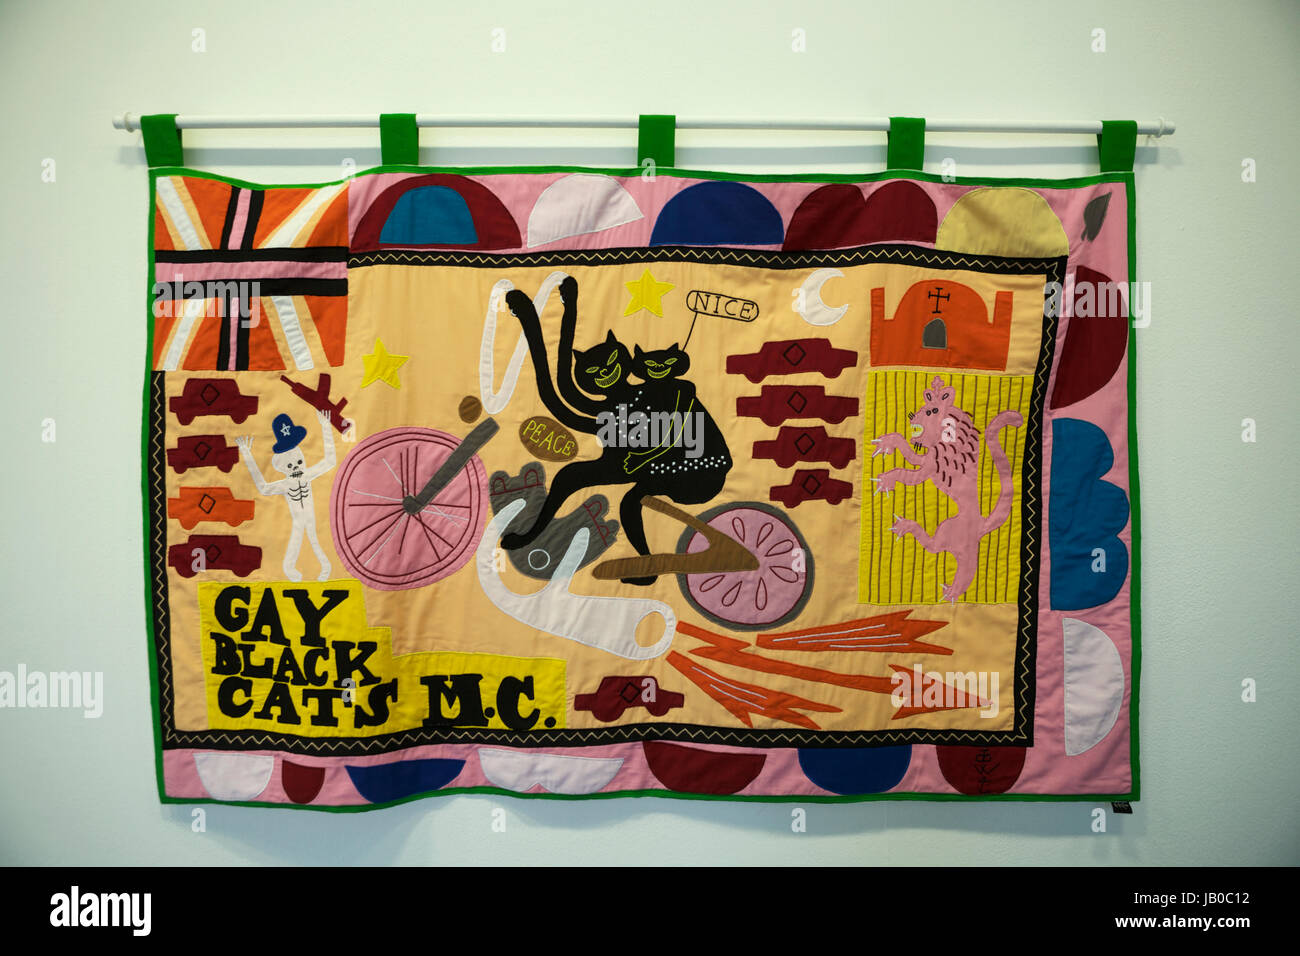 London, UK. 8th June, 2017. Grayson Perry’s art exhibition: “The Most Popular Art Exhibition Ever!”, at the Serpentine Gallery, Hyde Park, runs from the 8th June until 10th September 2017. Credit: Tony Farrugia/Alamy Live News Stock Photo